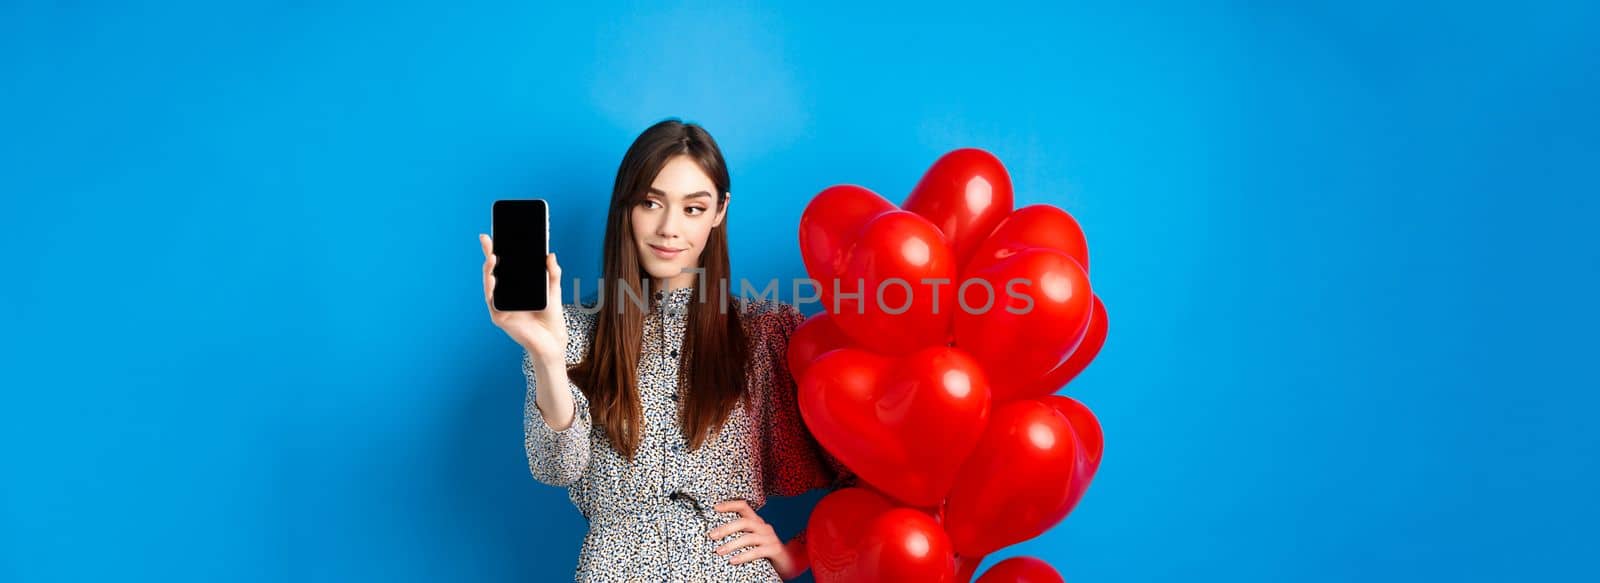 Valentines day. Pretty smiling woman in dress showing empty smartphone screen, standing near romantic balloons, blue background.